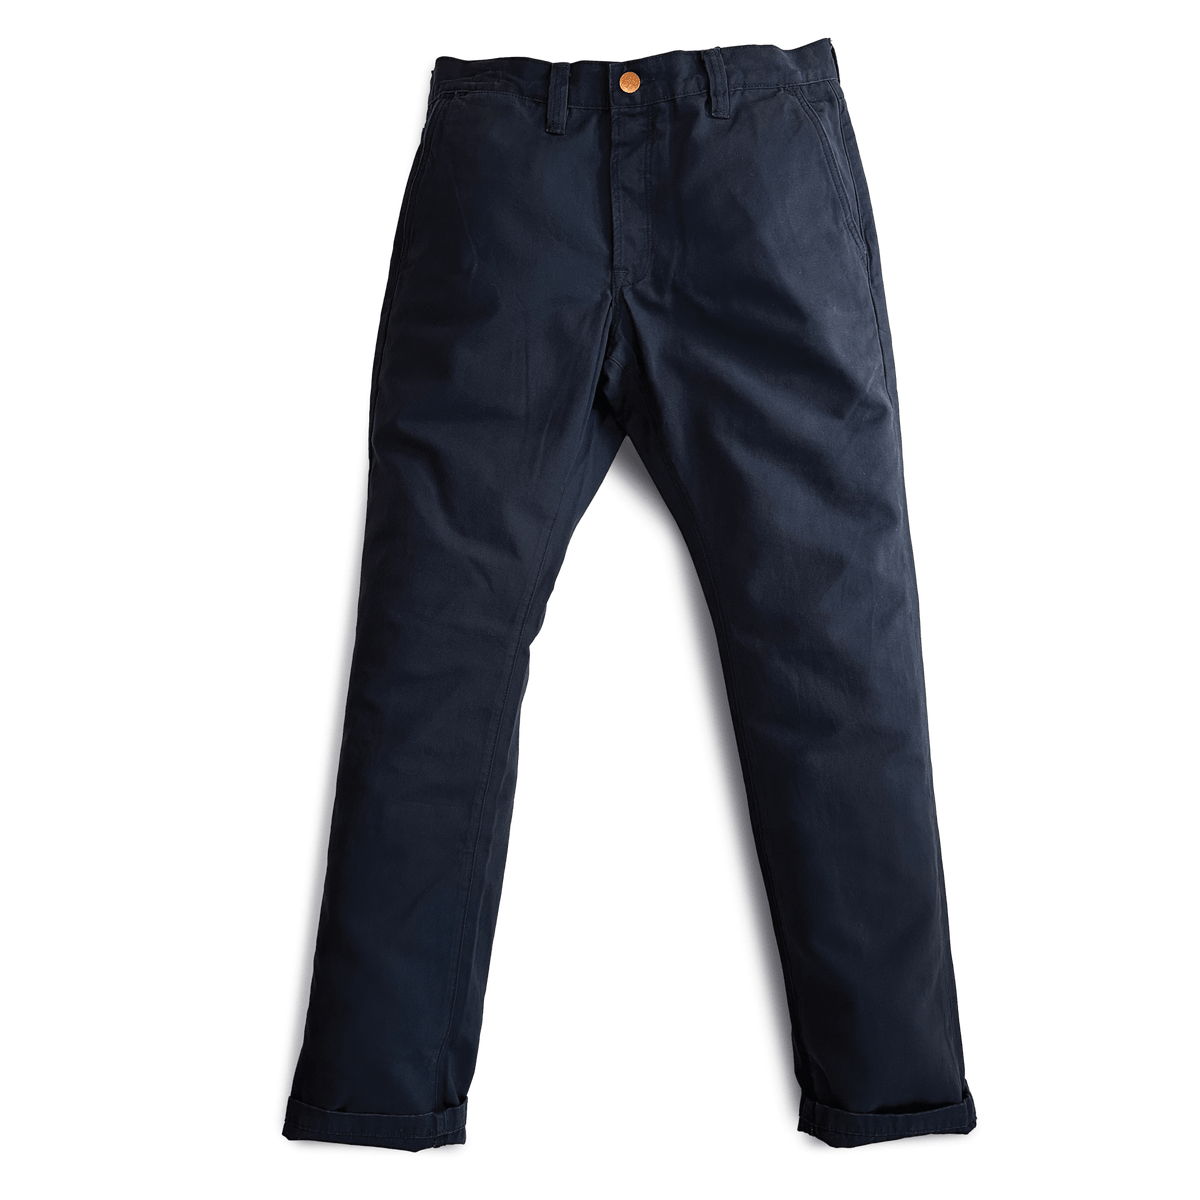 Foundation Brushed Canvas Pant - 8 oz. - Navy - grown&amp;sewn